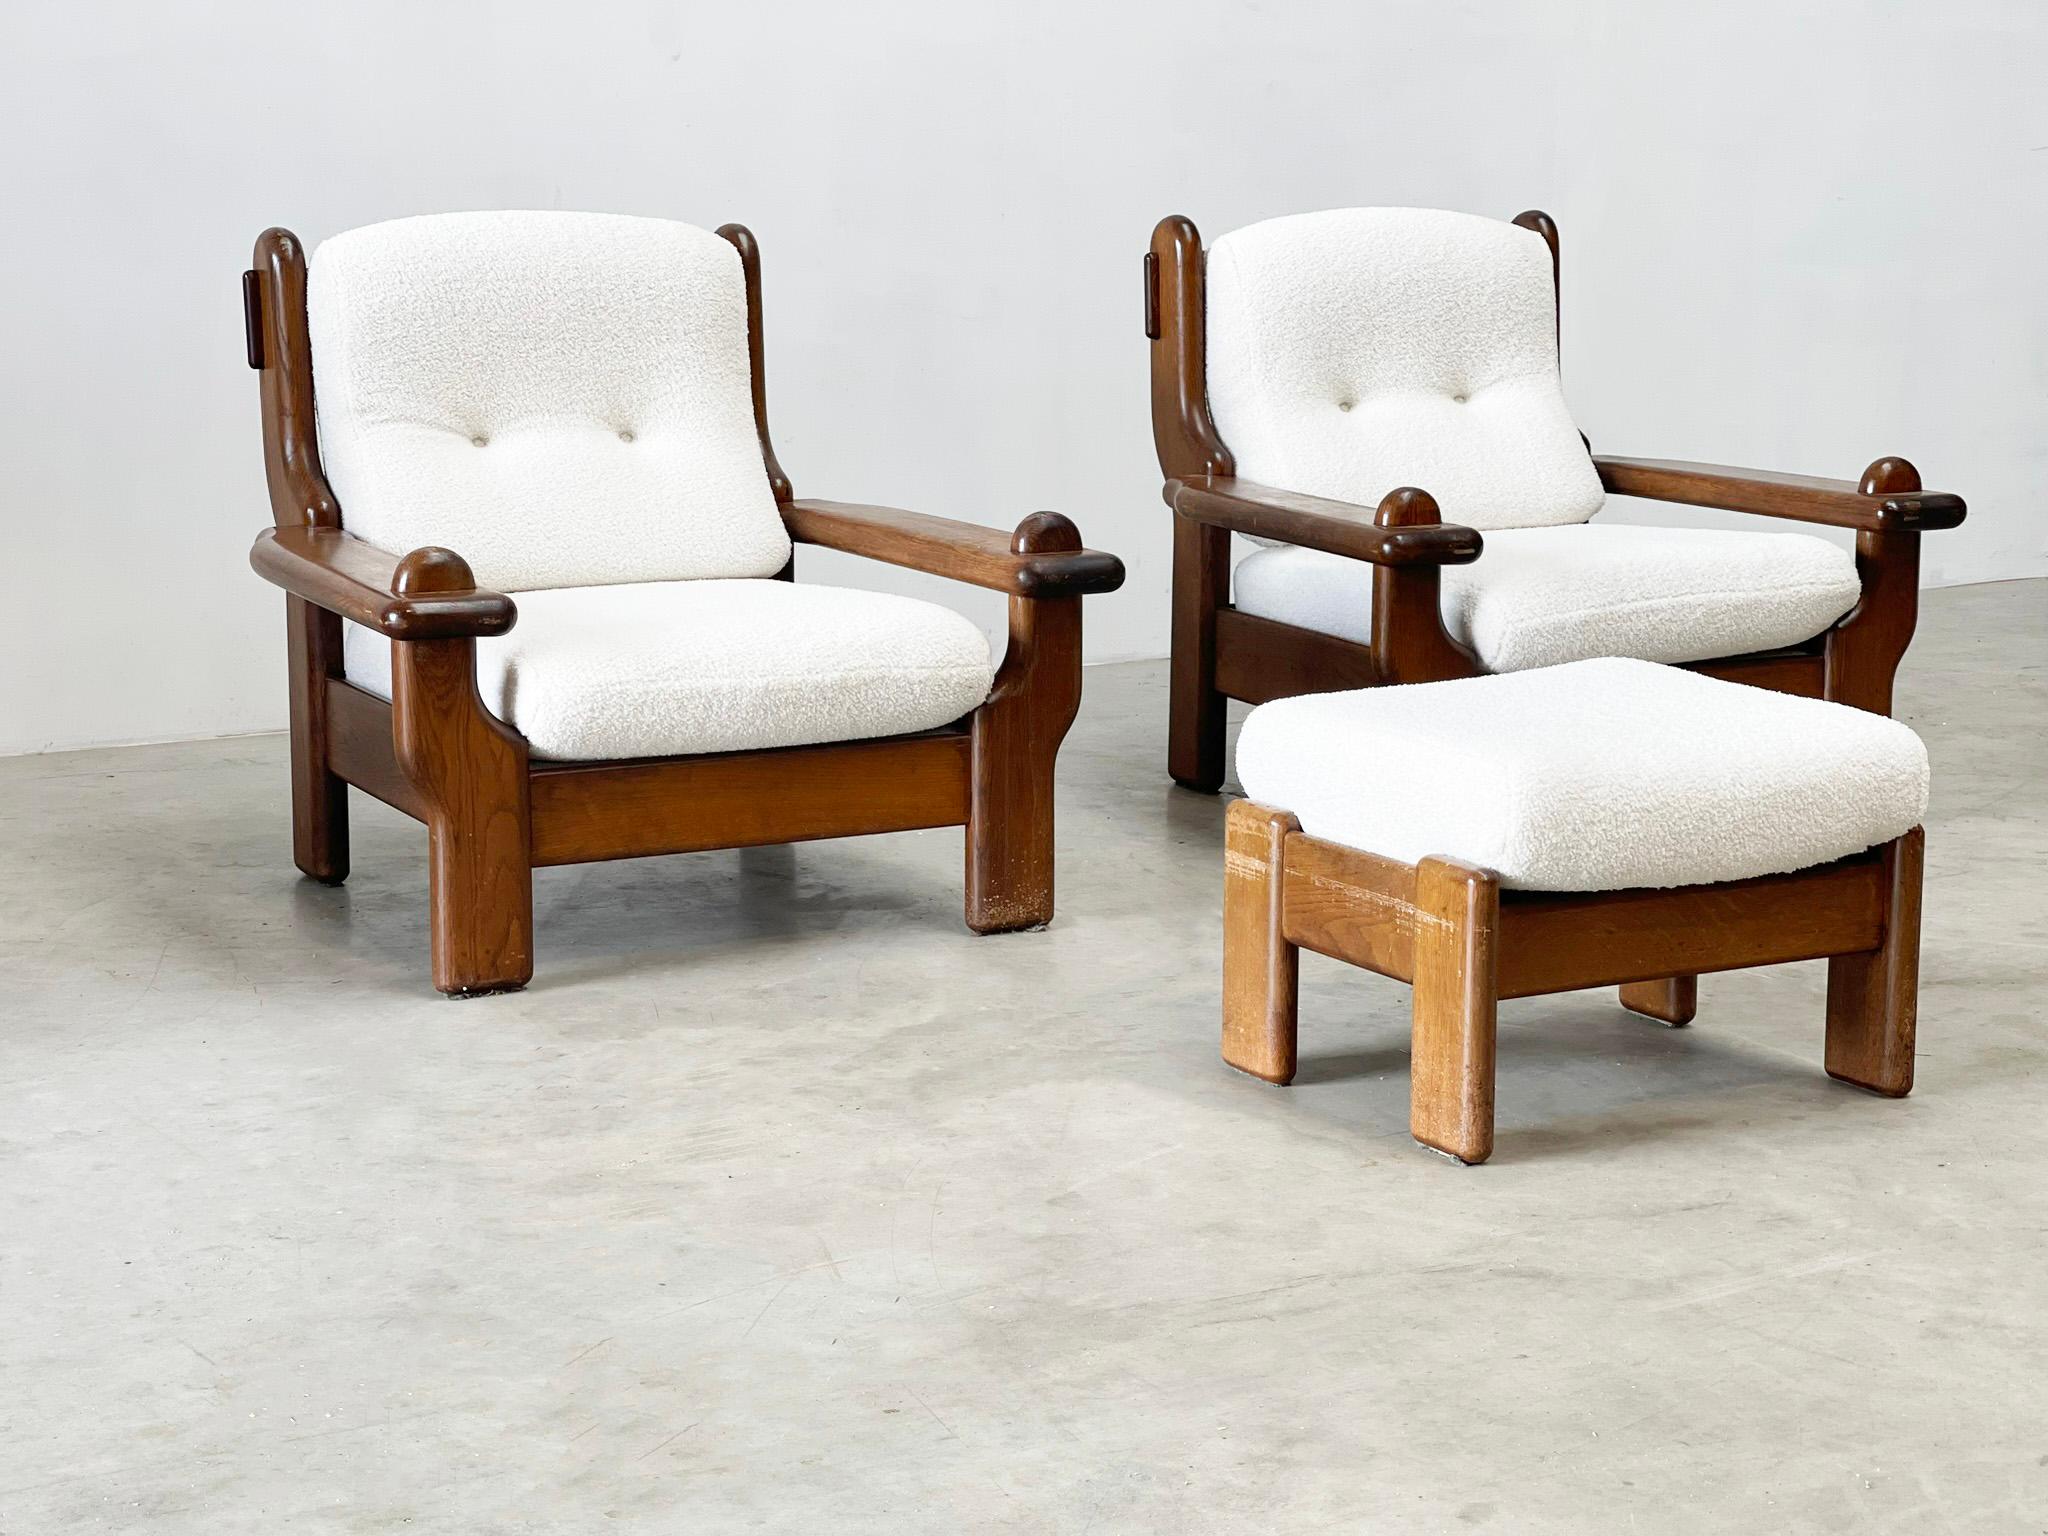 Very nice set of two bombastic lounge chairs. This set is probably made in the Netherlands or Germany. They have a very brutalist frame and heavy frame. This gives them a very good look and fit perfectly in a modern interior. They are reupholstered